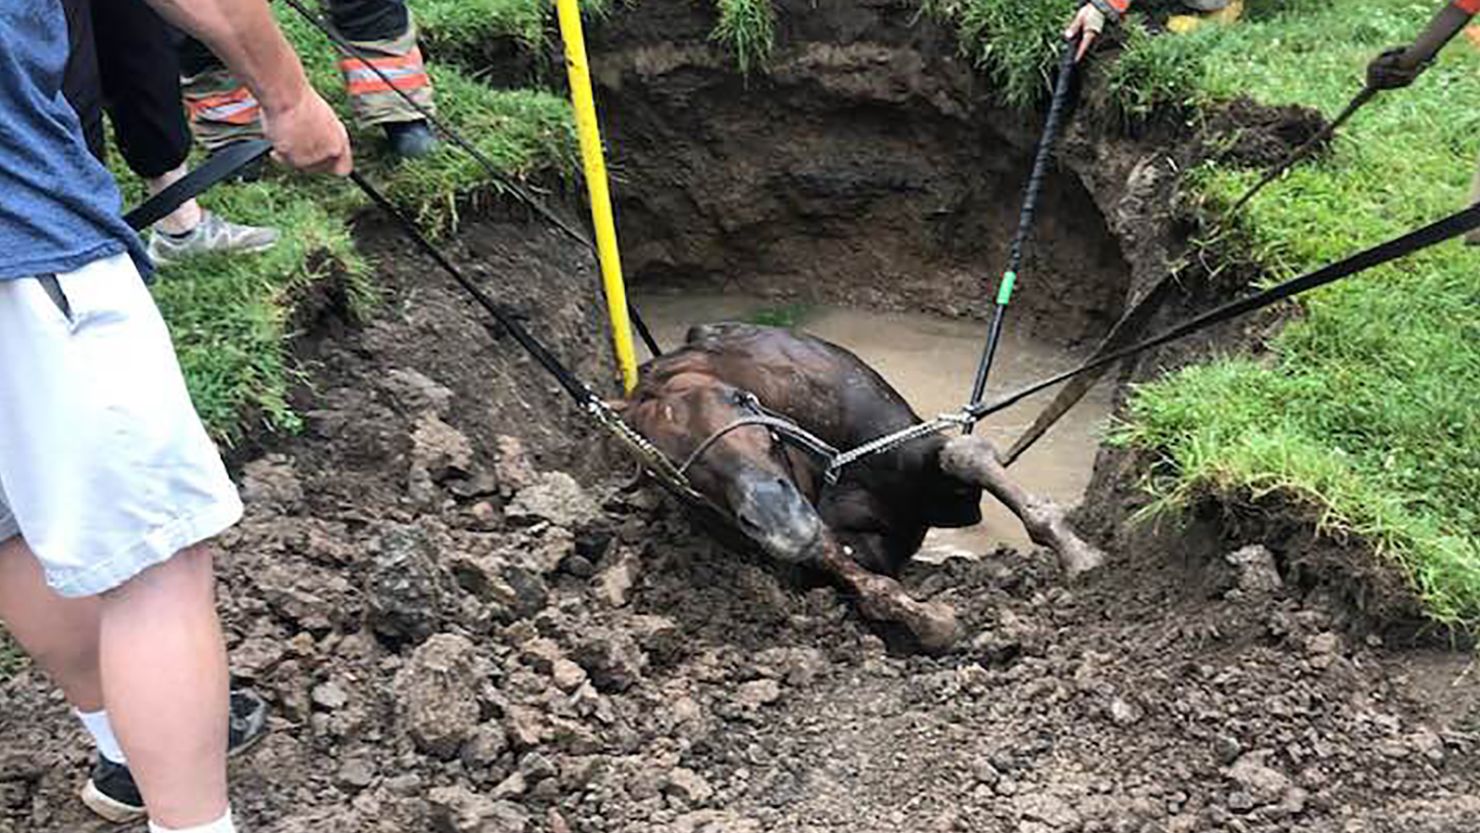 The racehorse being rescued on July 11.